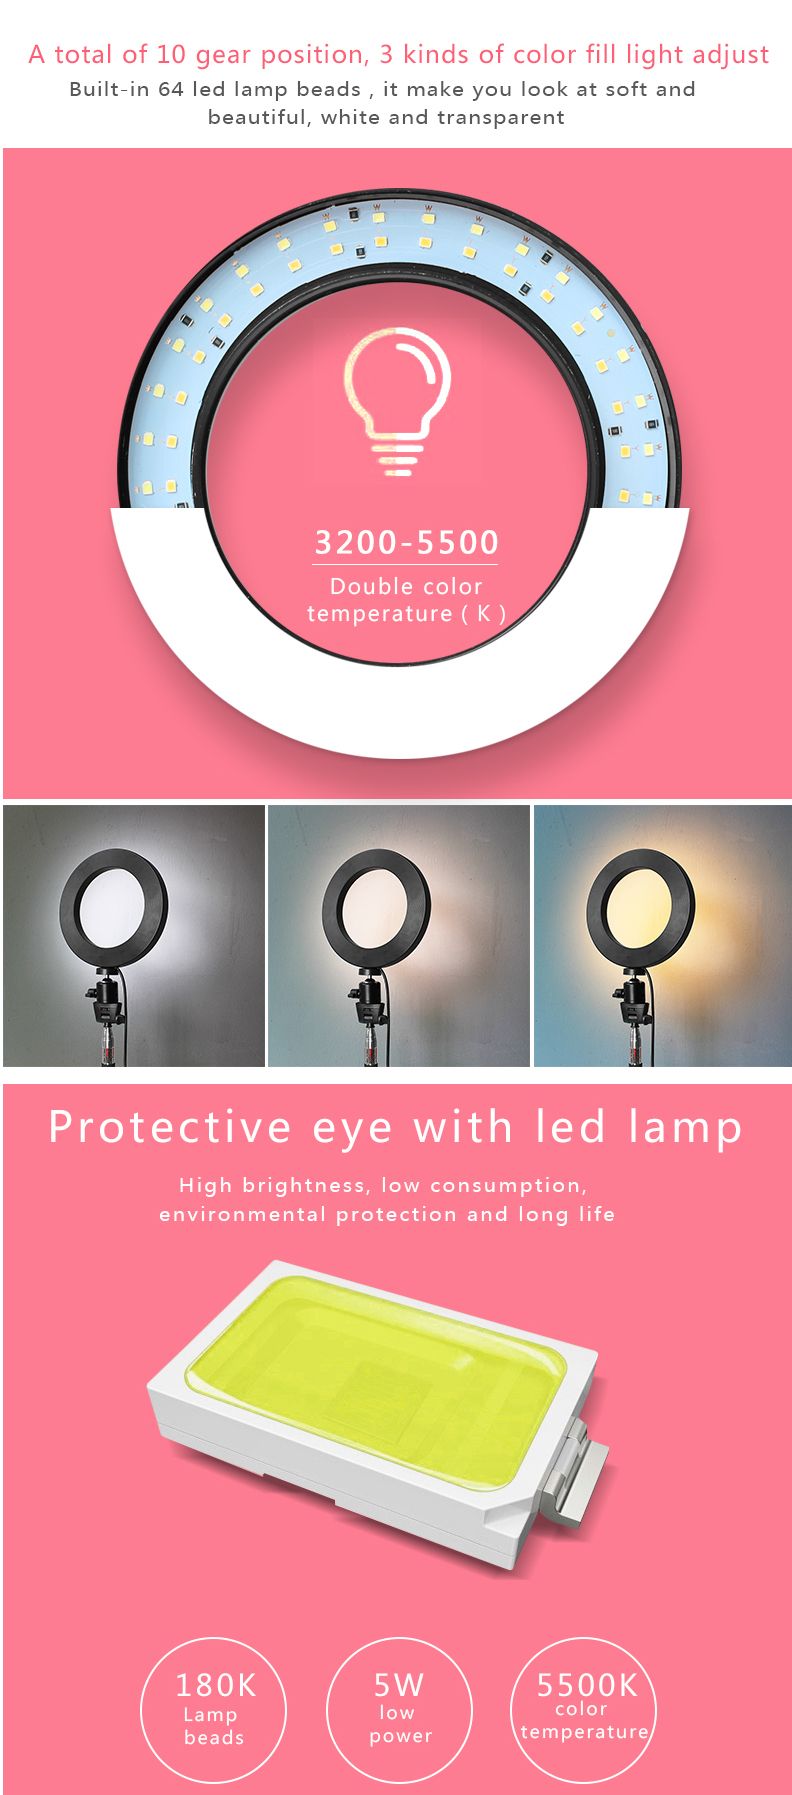 Yingnuost-Dimmable-Video-Ring-Light-145cm-LED-Makeup-Lamp-with-Selfie-Stick-Tripod-bluetooth-Shutter-1590869